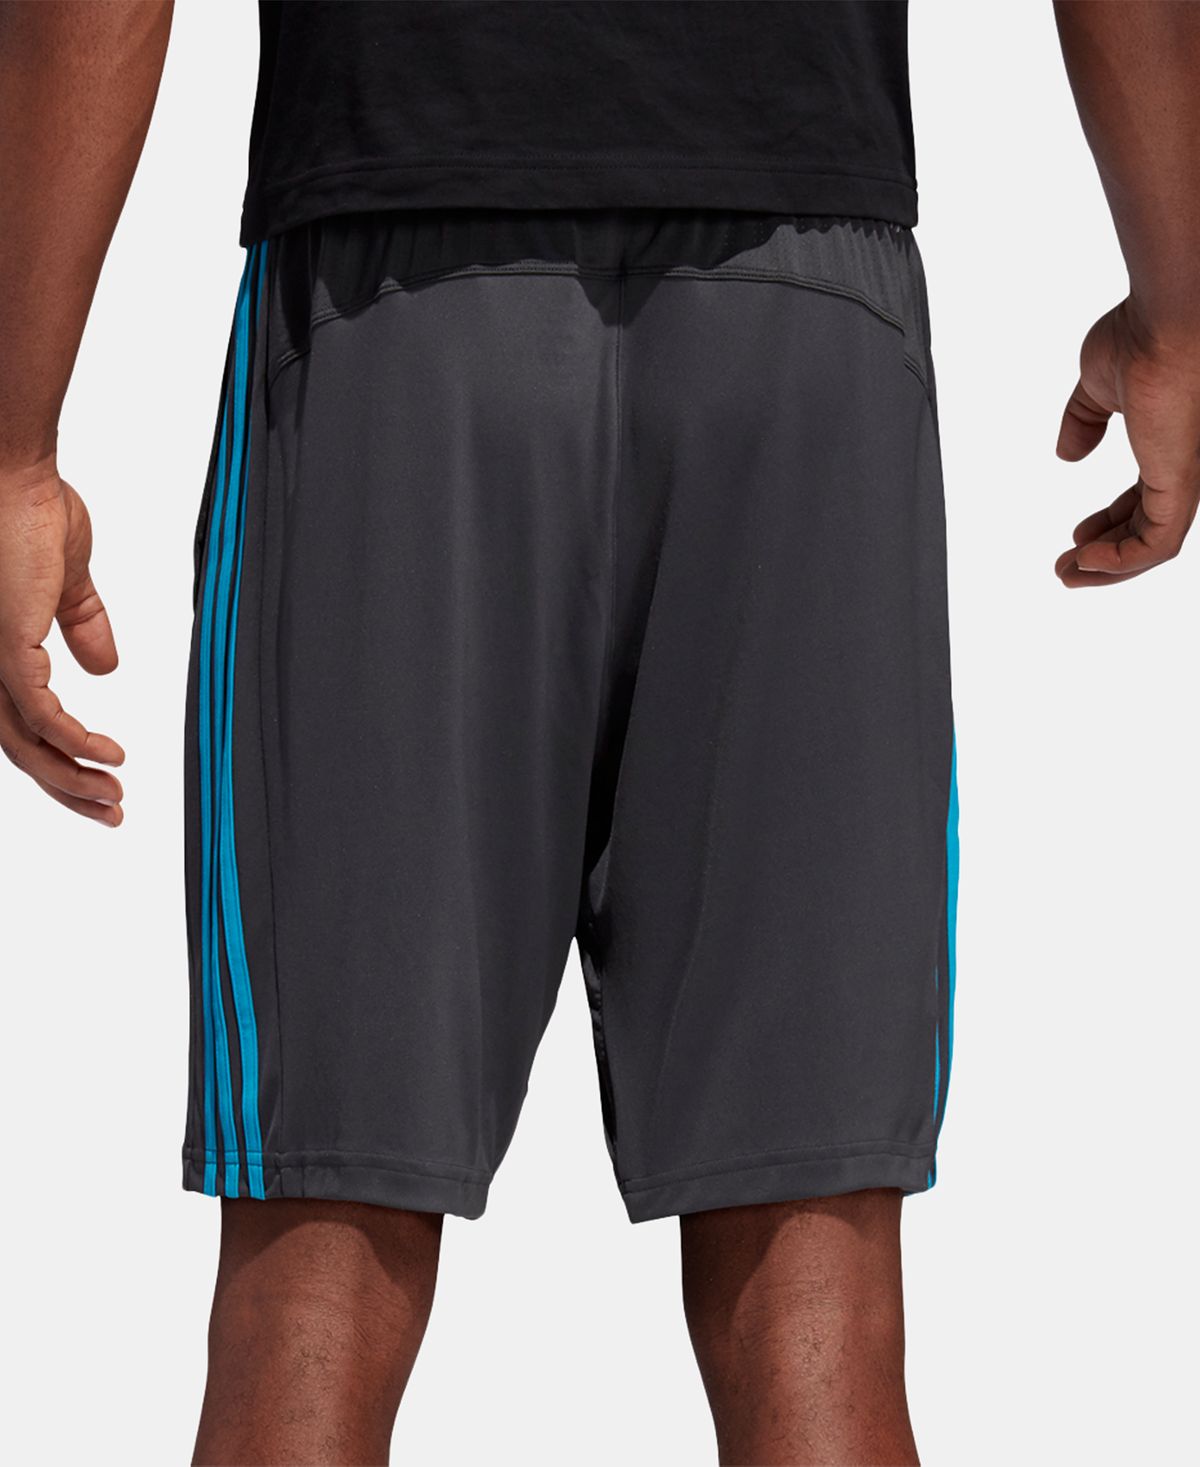 Adidas Designed 2 Move Climacooltraining Shorts Dgh/cyan